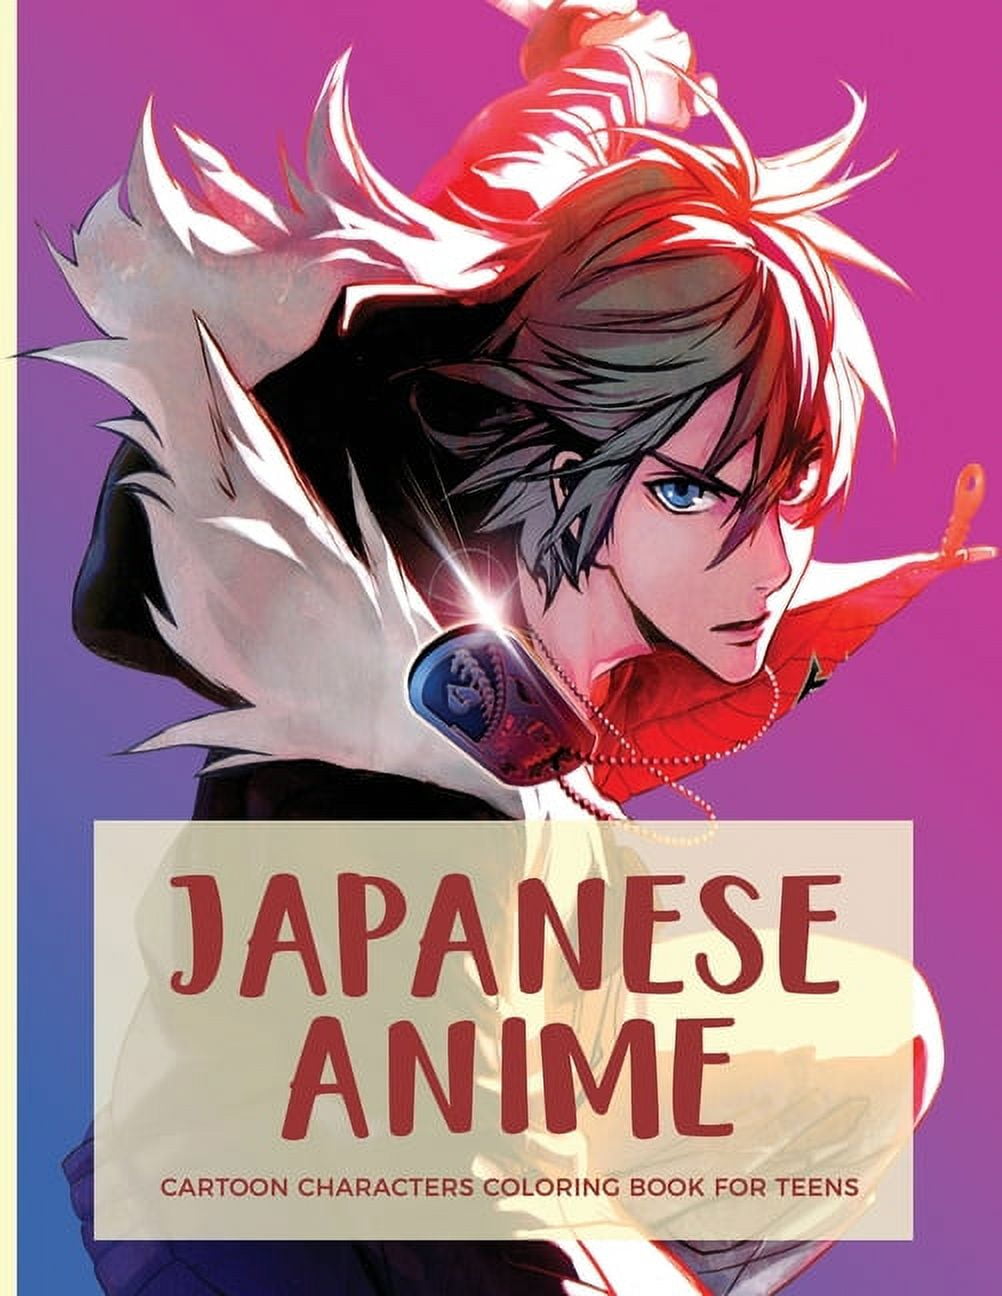 Easy apps, New books, Free anime